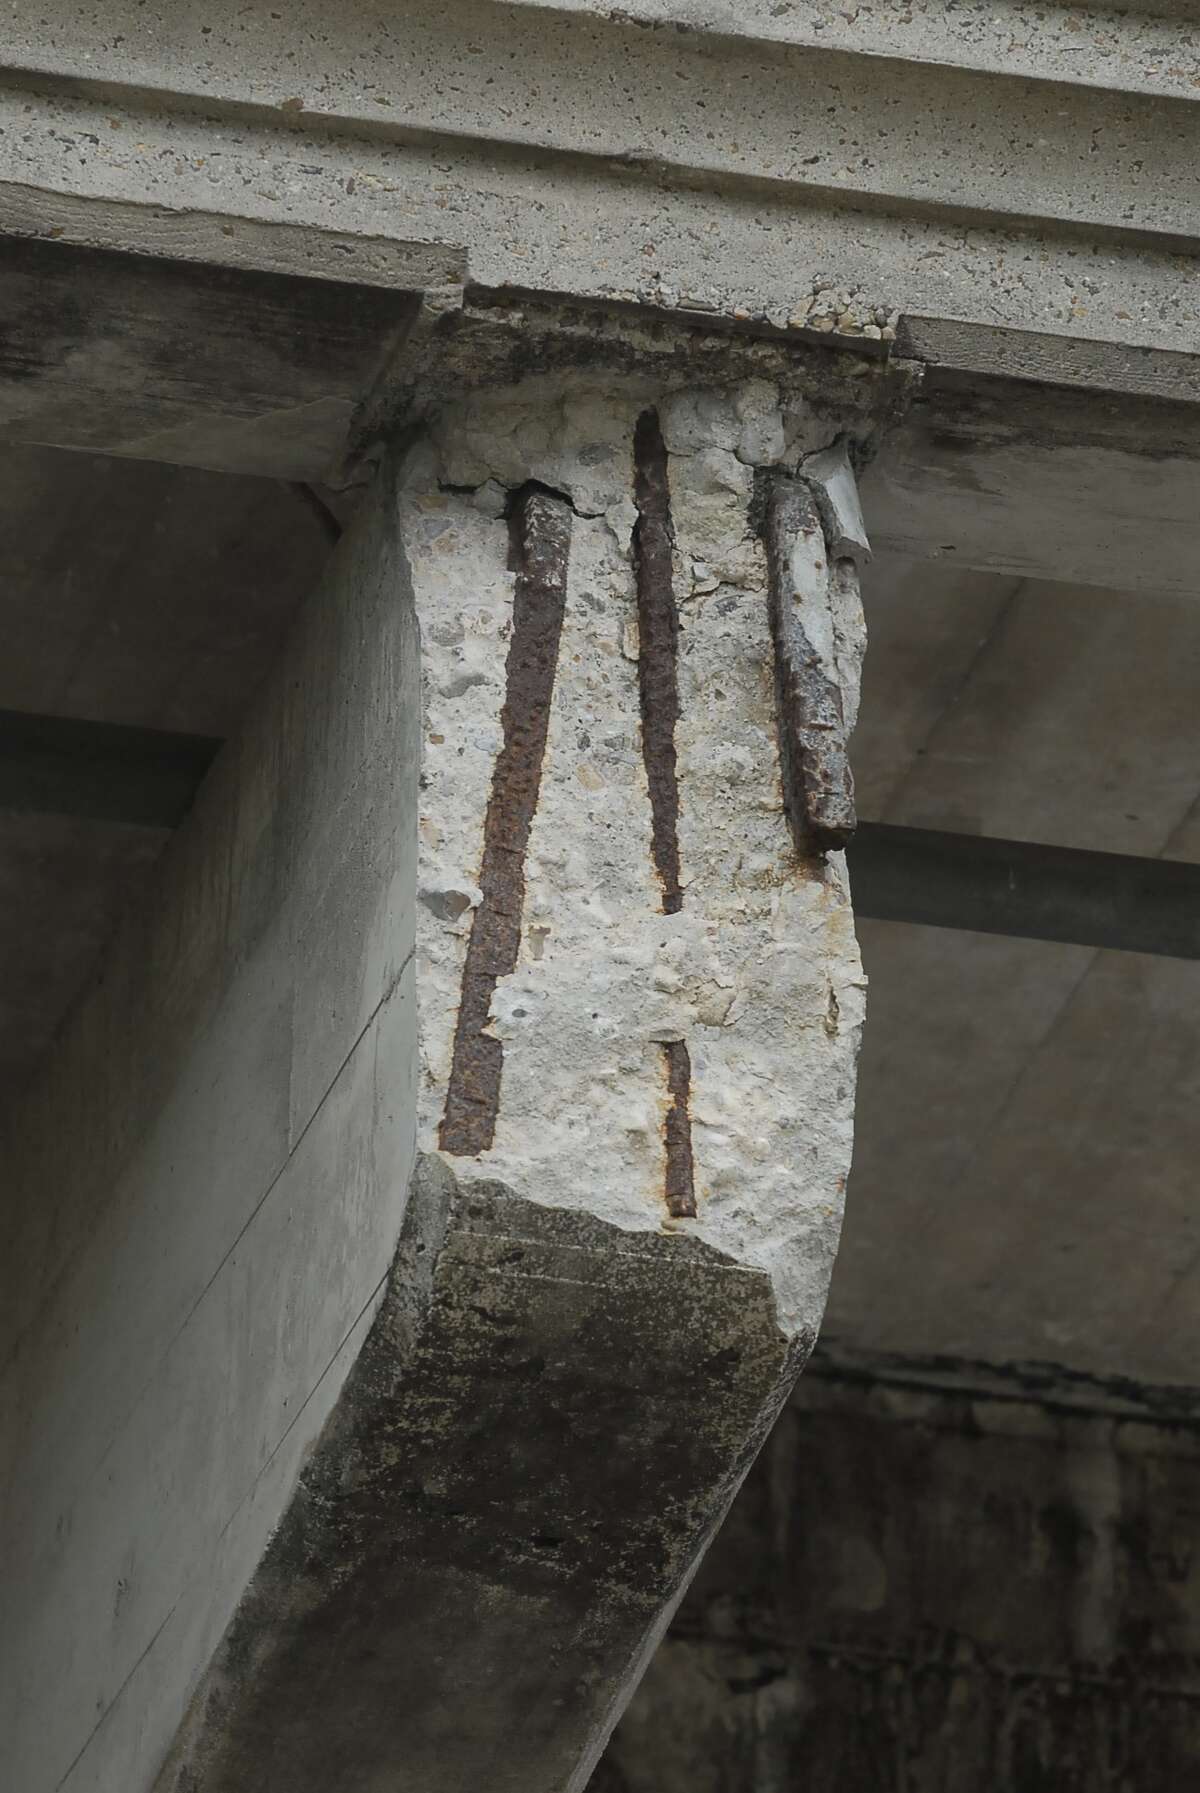 The Yale Street Bridge (built in 1931) at Interstate 10 over White Oak bayou and deteriorating concrete support structures exposing metal rebar photographed Sunday 3/18/12. Photo by Tony Bullard.